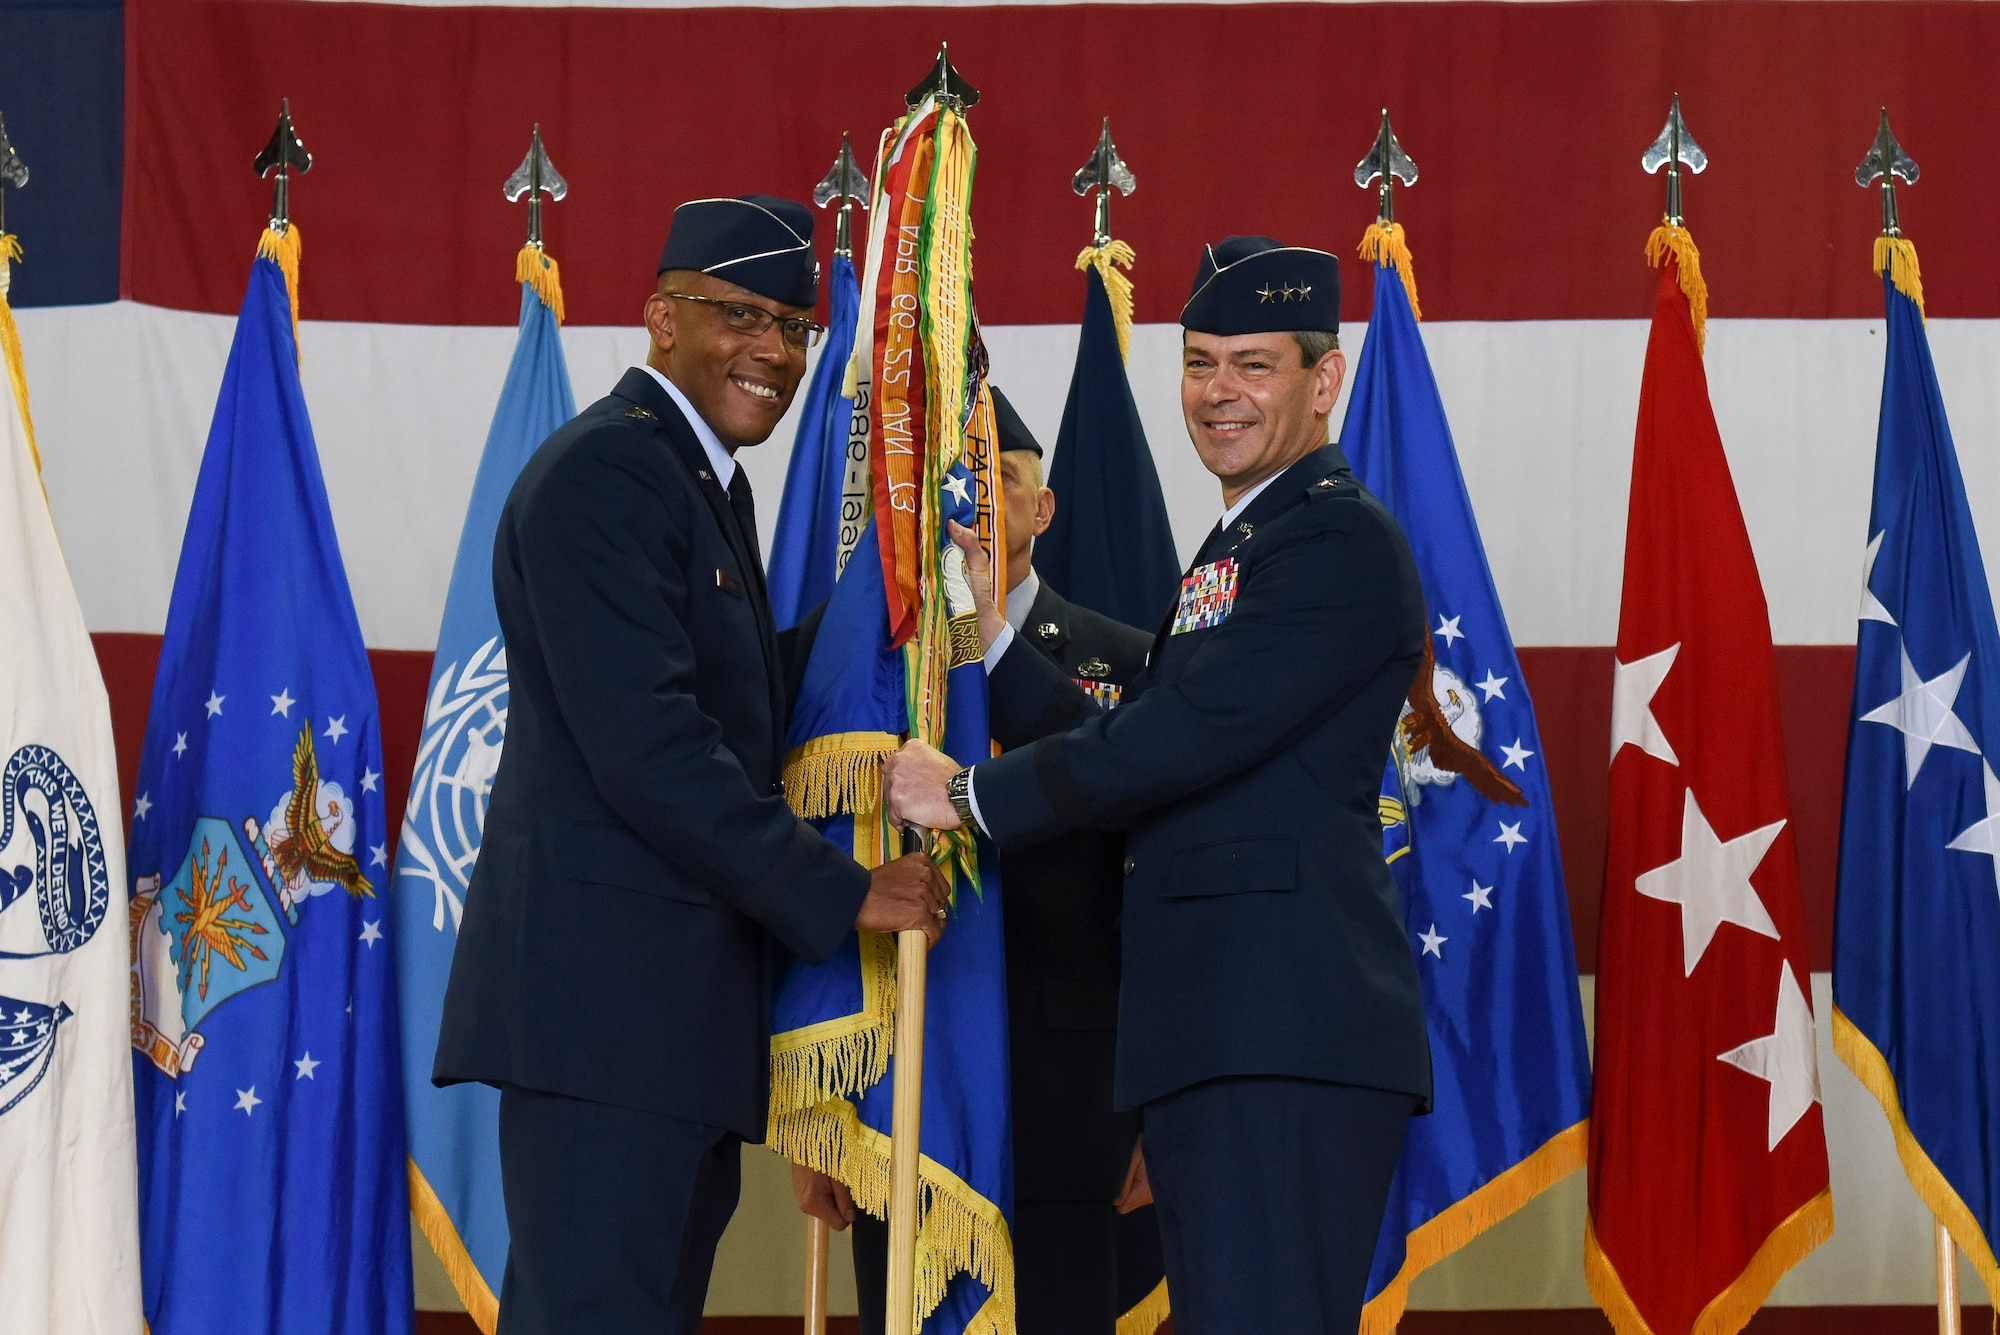 Lt. Gen. Kenneth S. Wilsbach, receives the guideon from Gen. CQ Brown, Jr., Pacific Air Forces commander, as he assumes command and becomes the Deputy Commander, U.S. Forces Korea/ Commander, Air Component Command, United Nations Command/Air Component Command, Combined Forces Command/7th AF, Pacific Air Forces, Osan AB, Republic of Korea (U.S. Photo by Senior Airman Savannah L. Waters)